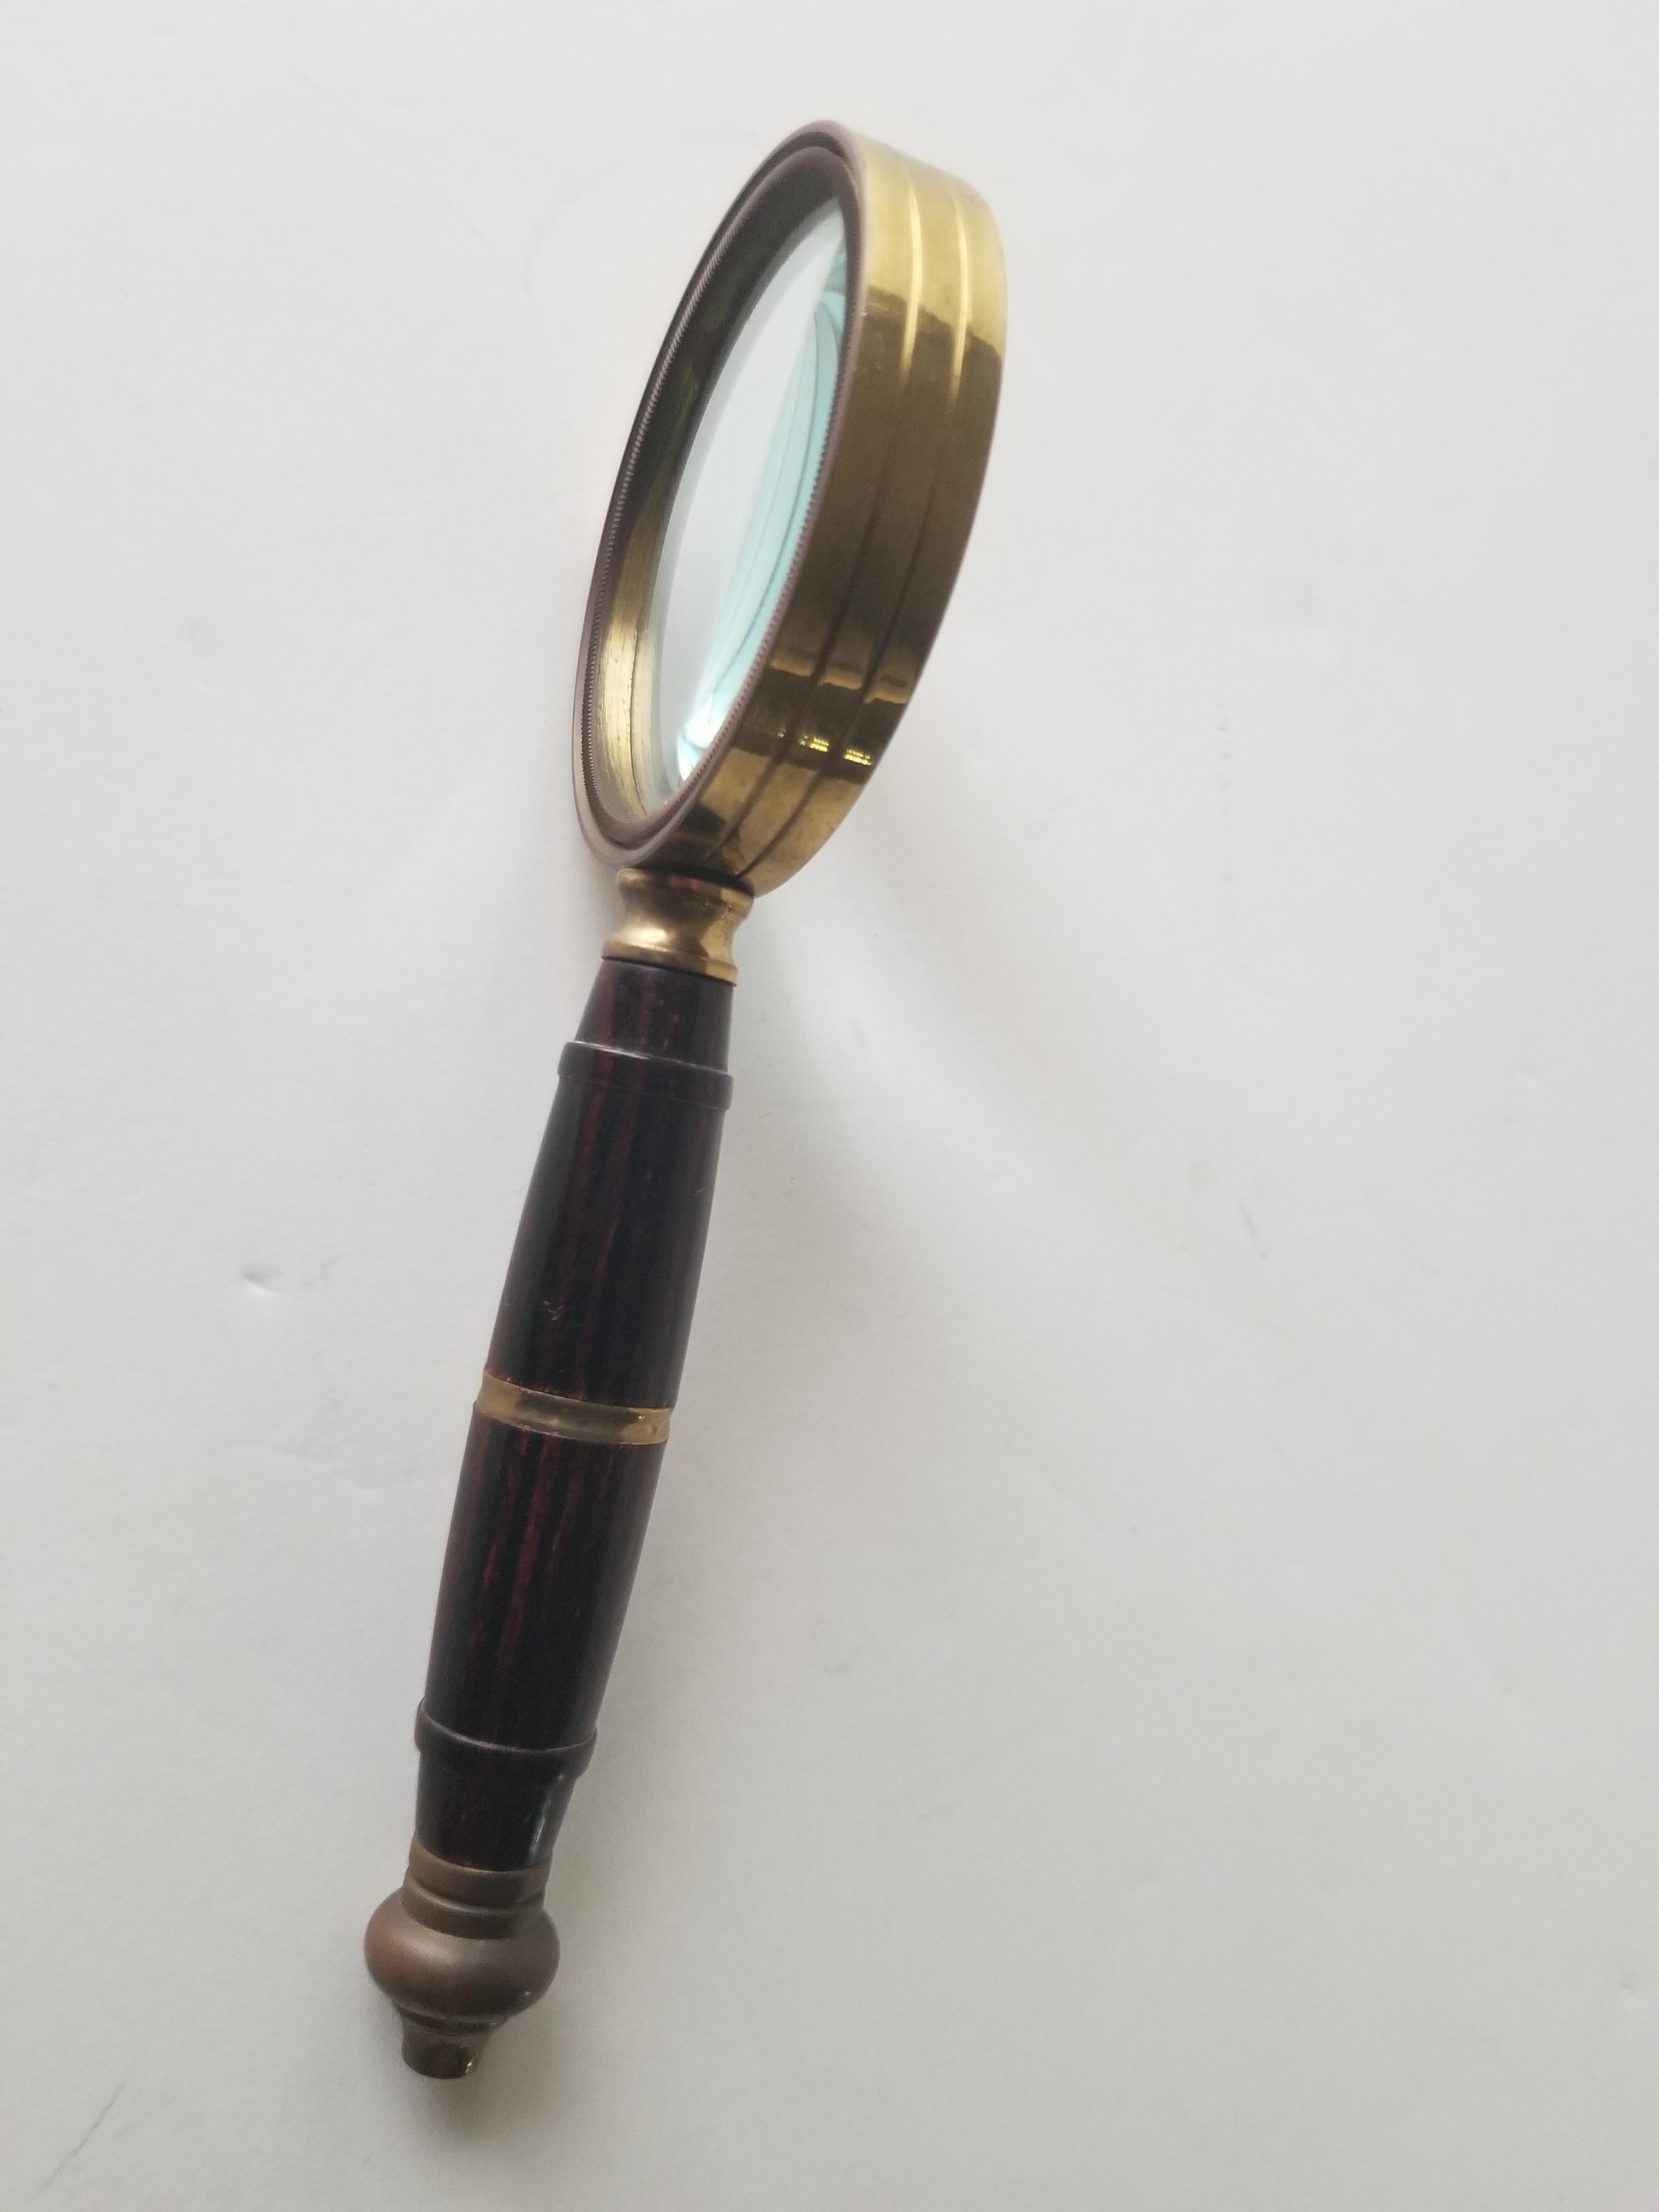 Mid-20th Century Handheld Petite Magnifying Glass Antique Vintage Sculptural Brass